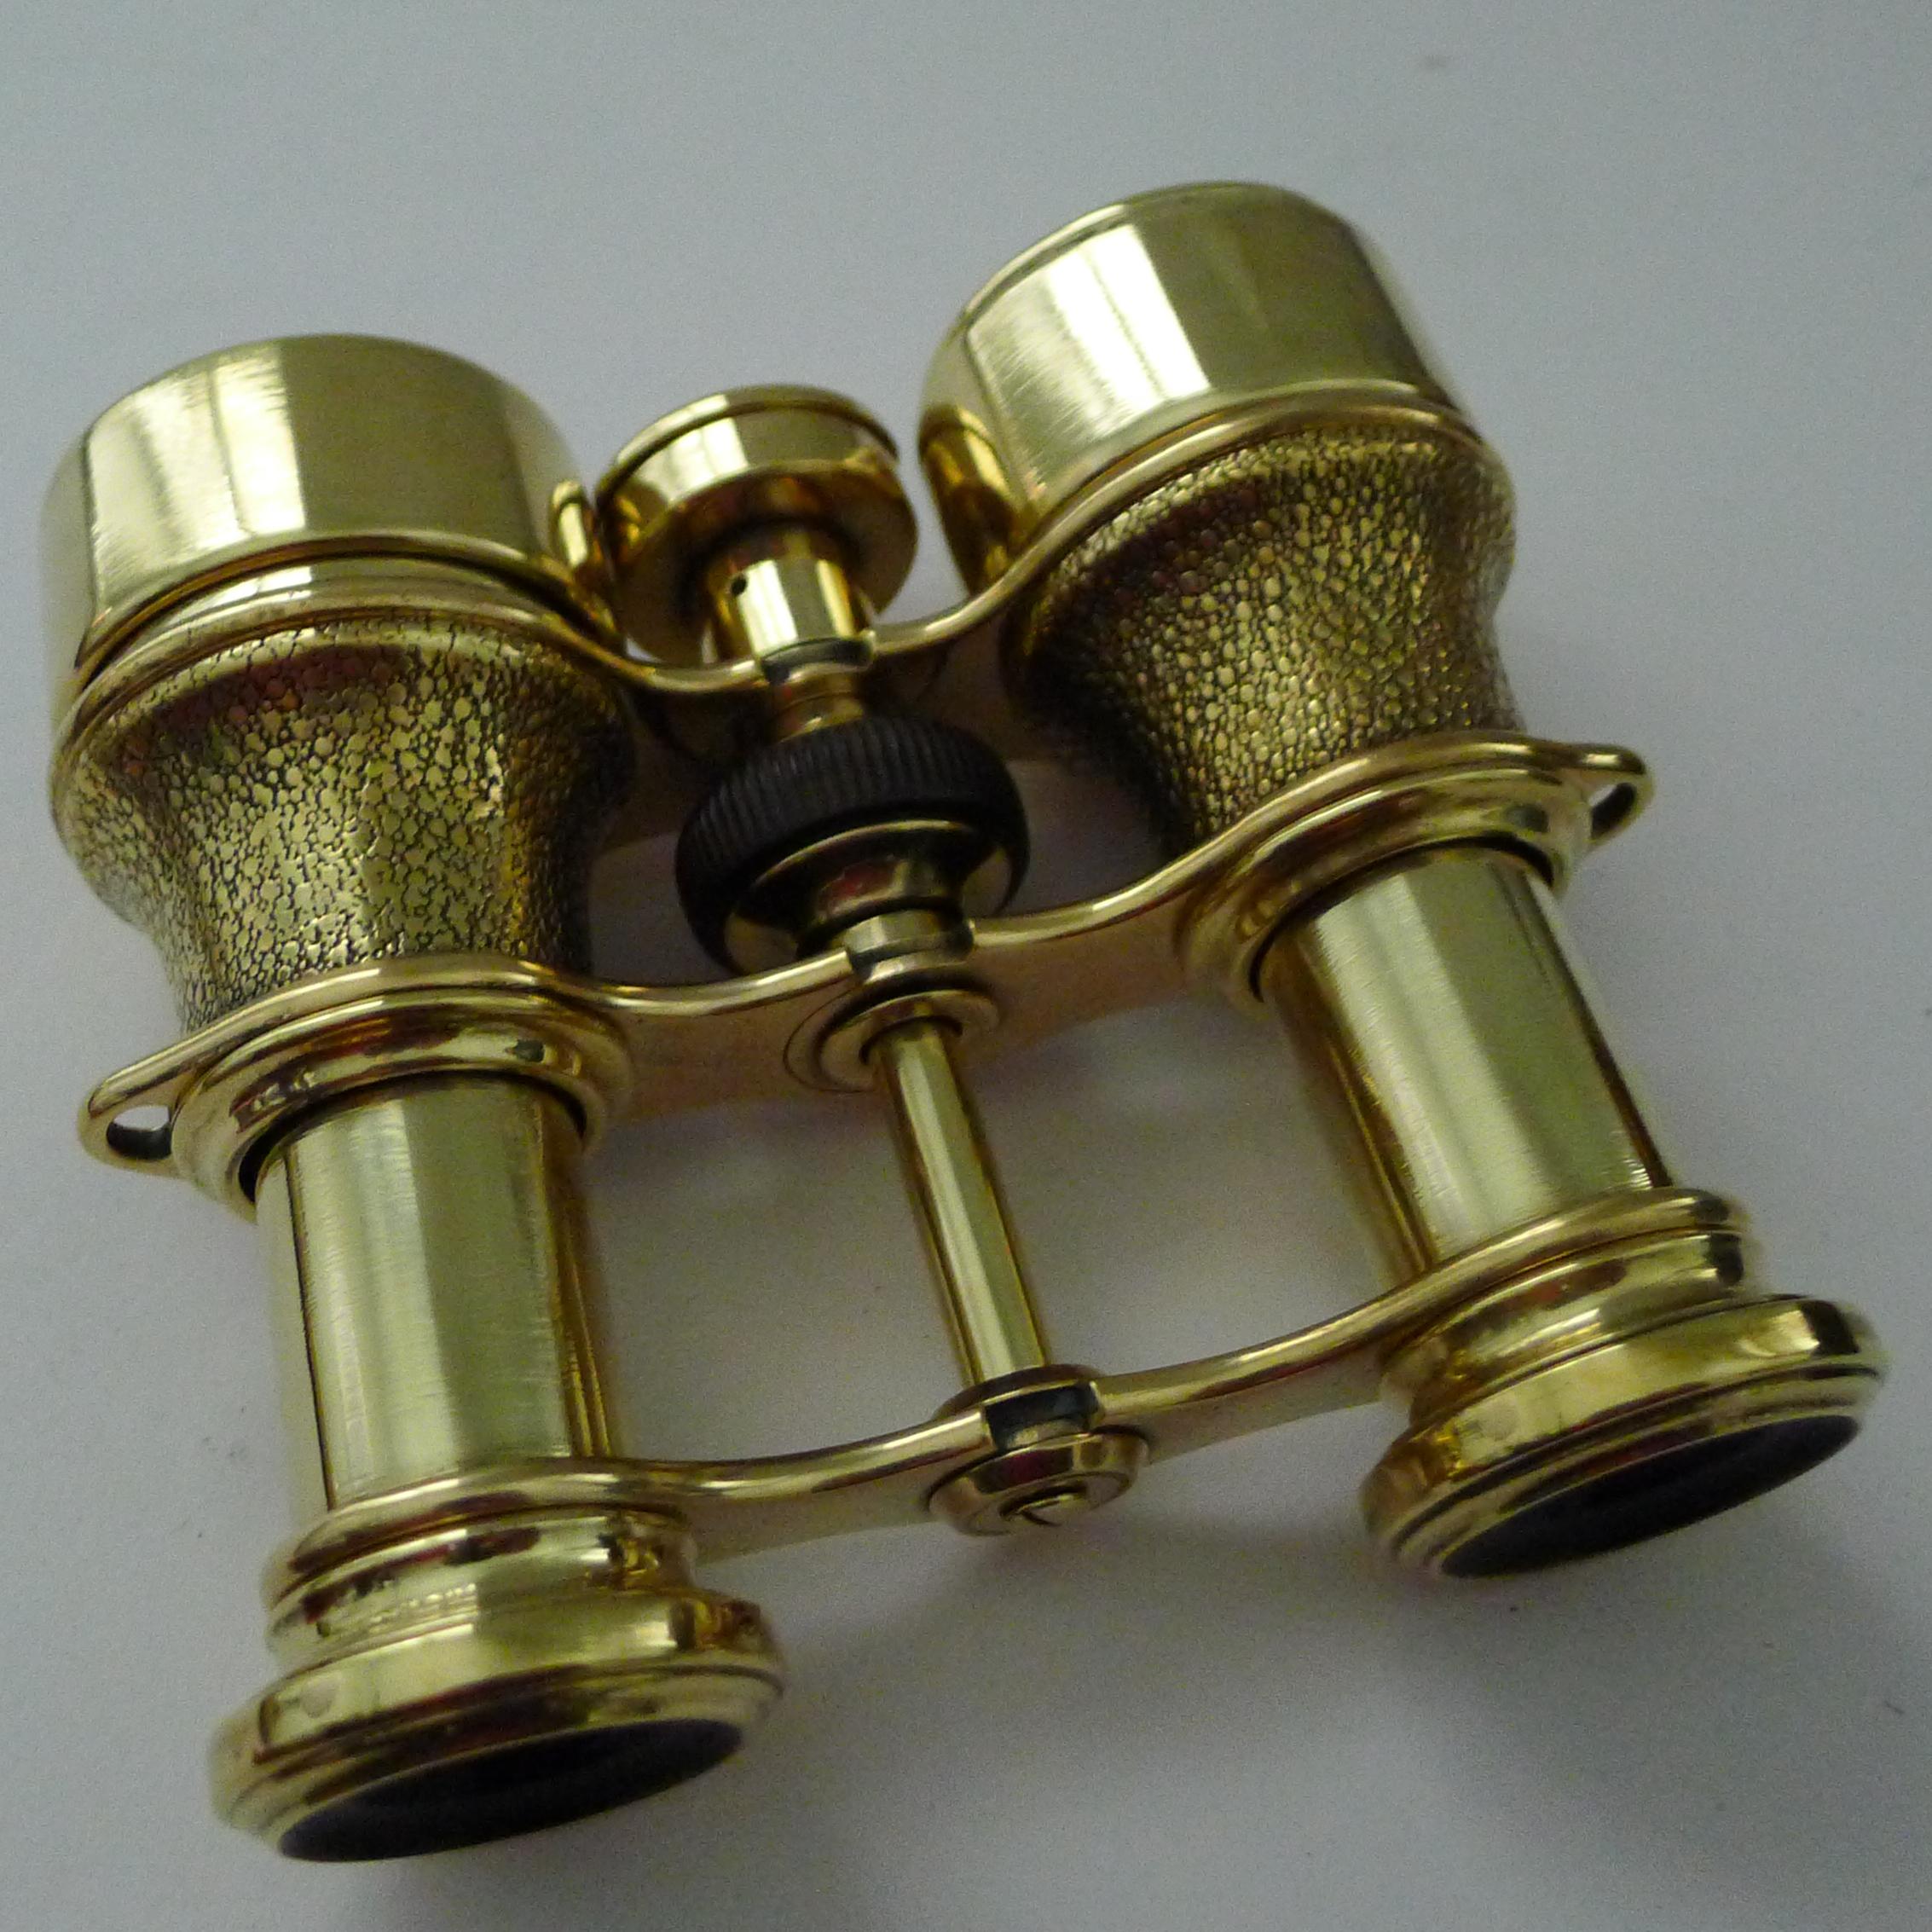 Brass Antique English Field Glasses / Binoculars by Lawrence and Mayo - With Compass For Sale